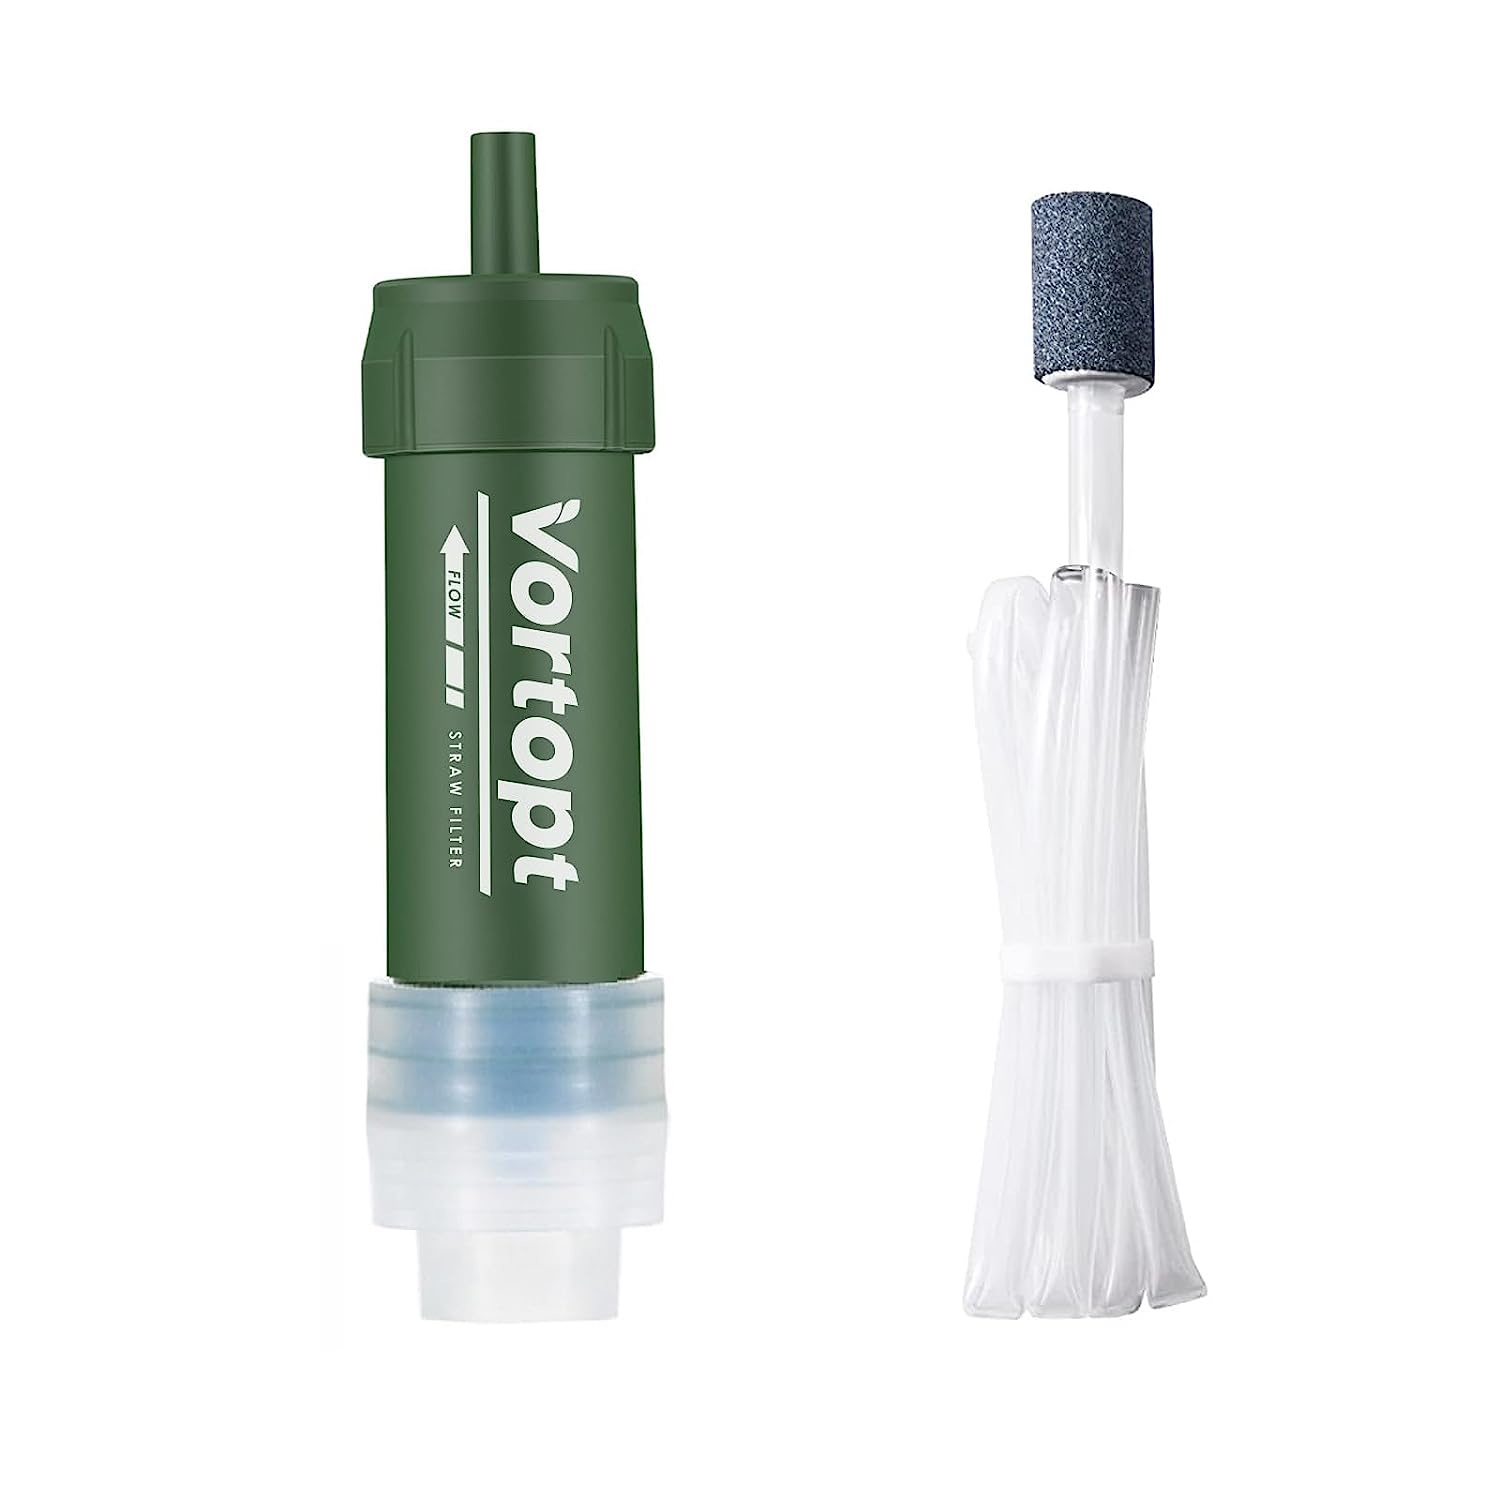 Vortopt Gravity Water Filter - Camping Water Filtration System - Portable Water Purifier Straw for Hiking, Travel and Survival Gear Emergency - SGS, CE Certified, 0.01 Micron, 4000L